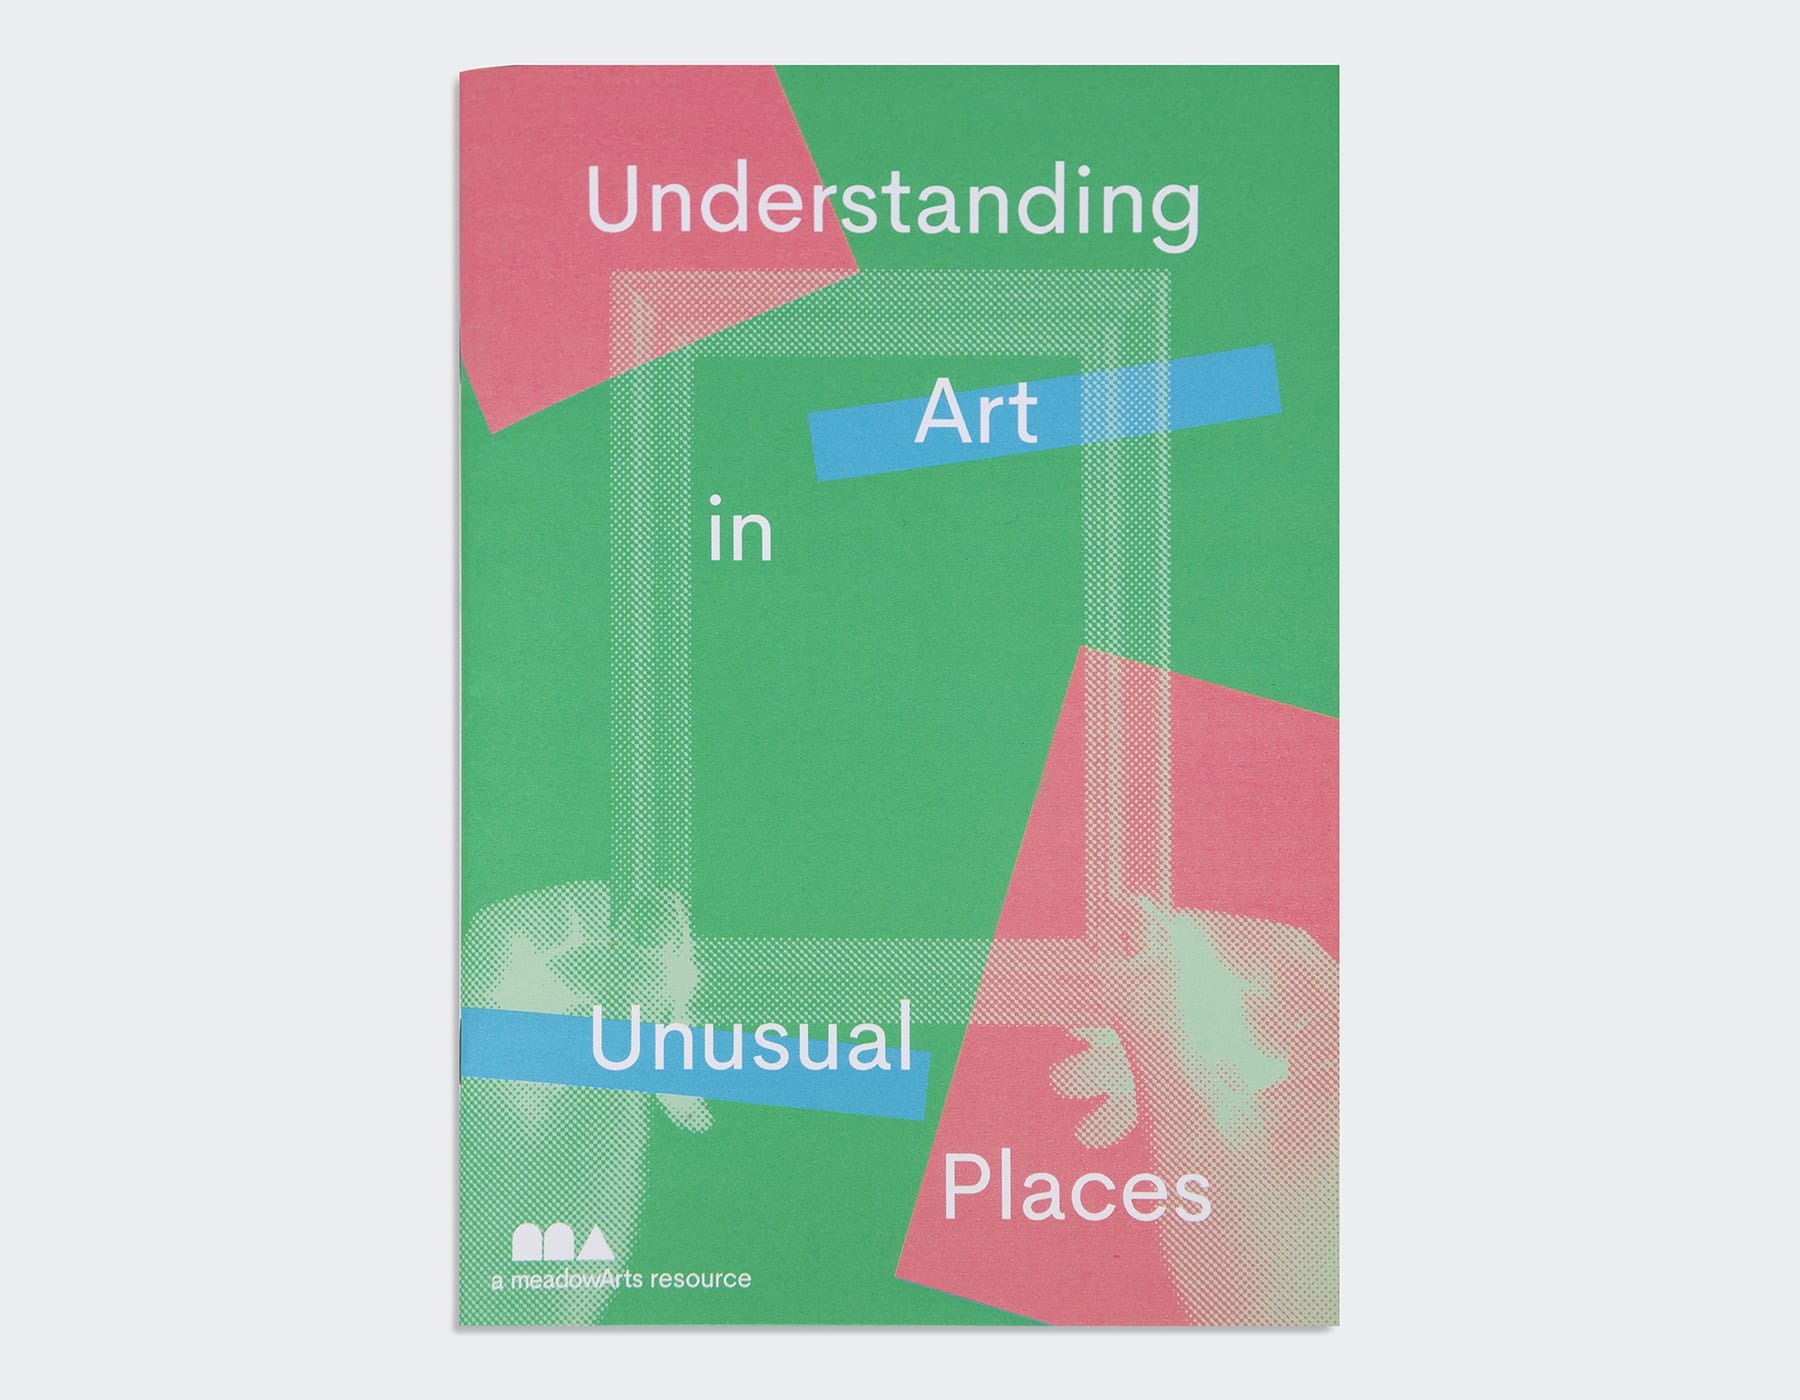 Understanding Art in Unusual Places by Colour Format for Meadow Arts